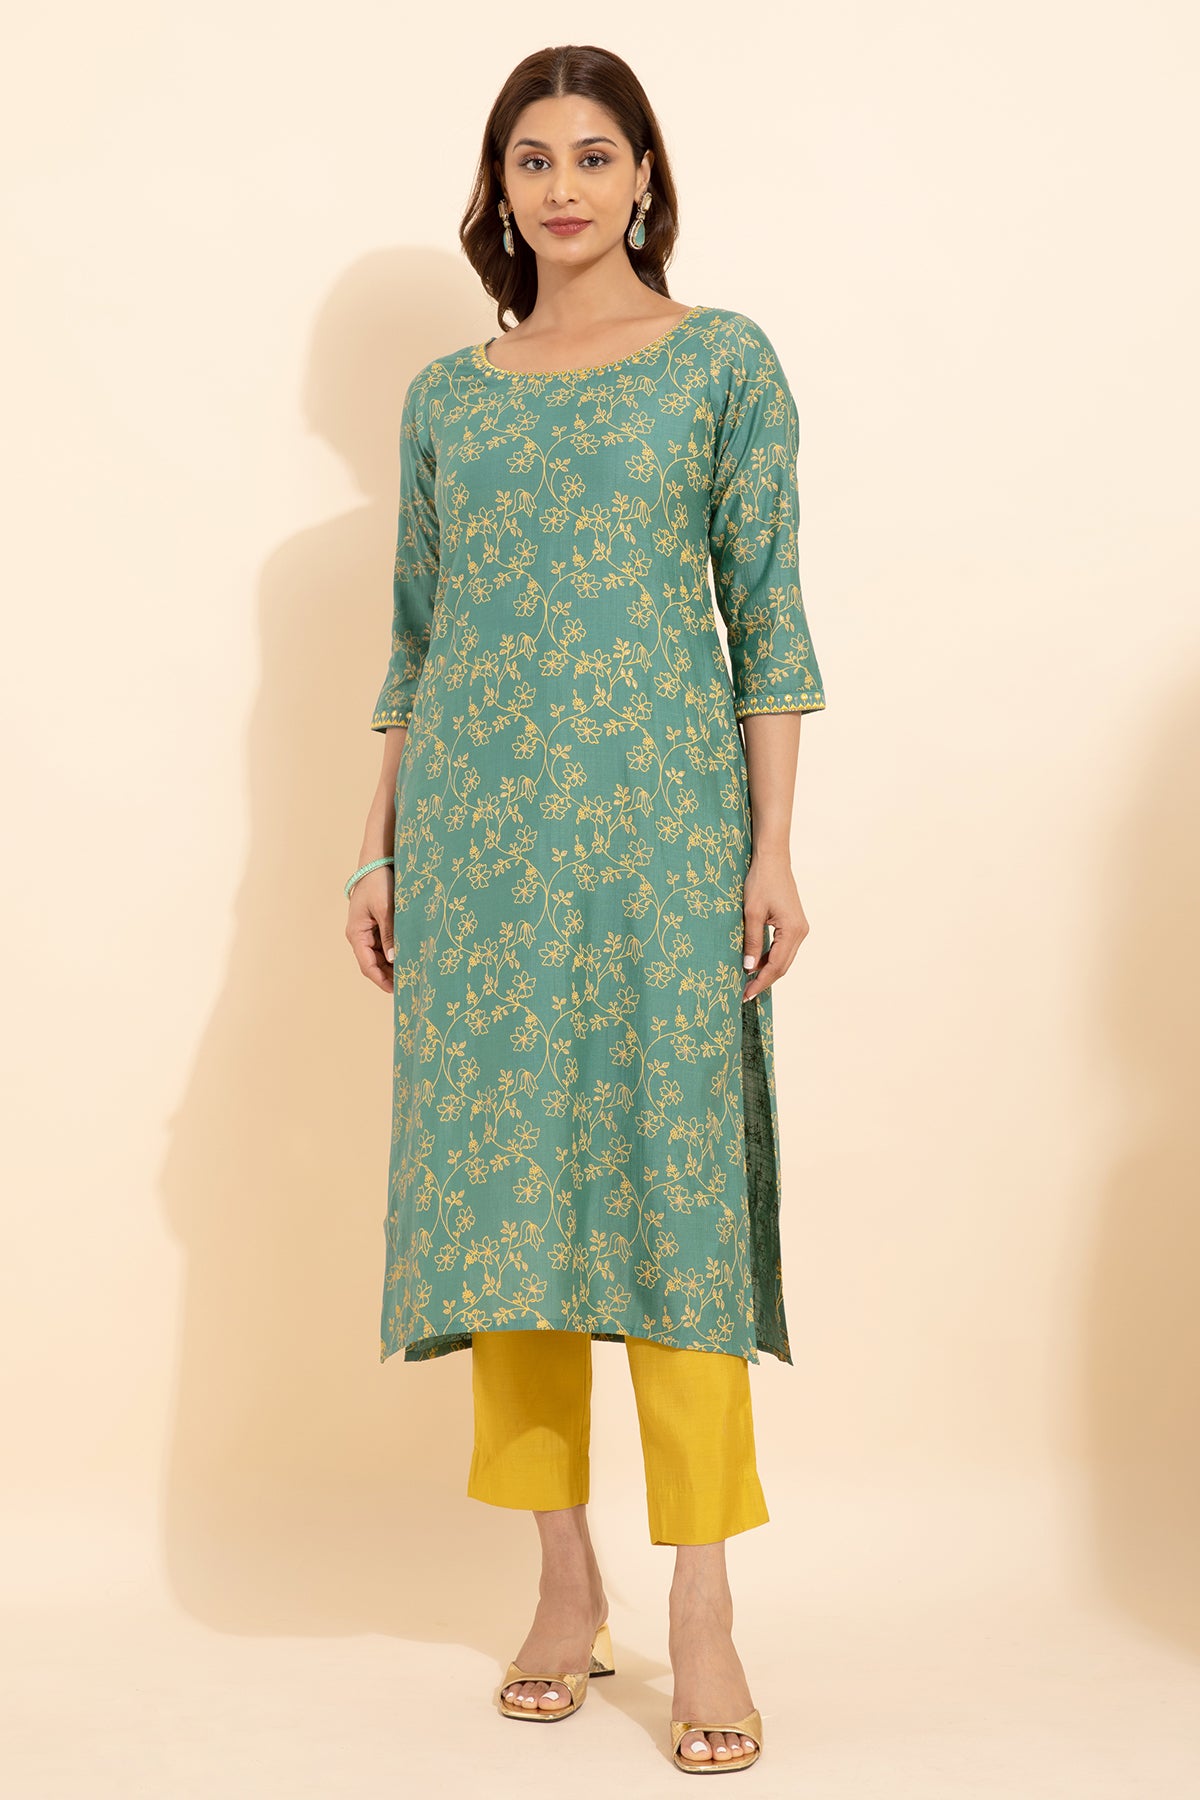 Jewel Embroidered Neckline & Floral Printed Kurta Set With Sequin Dupatta - Green & Yellow